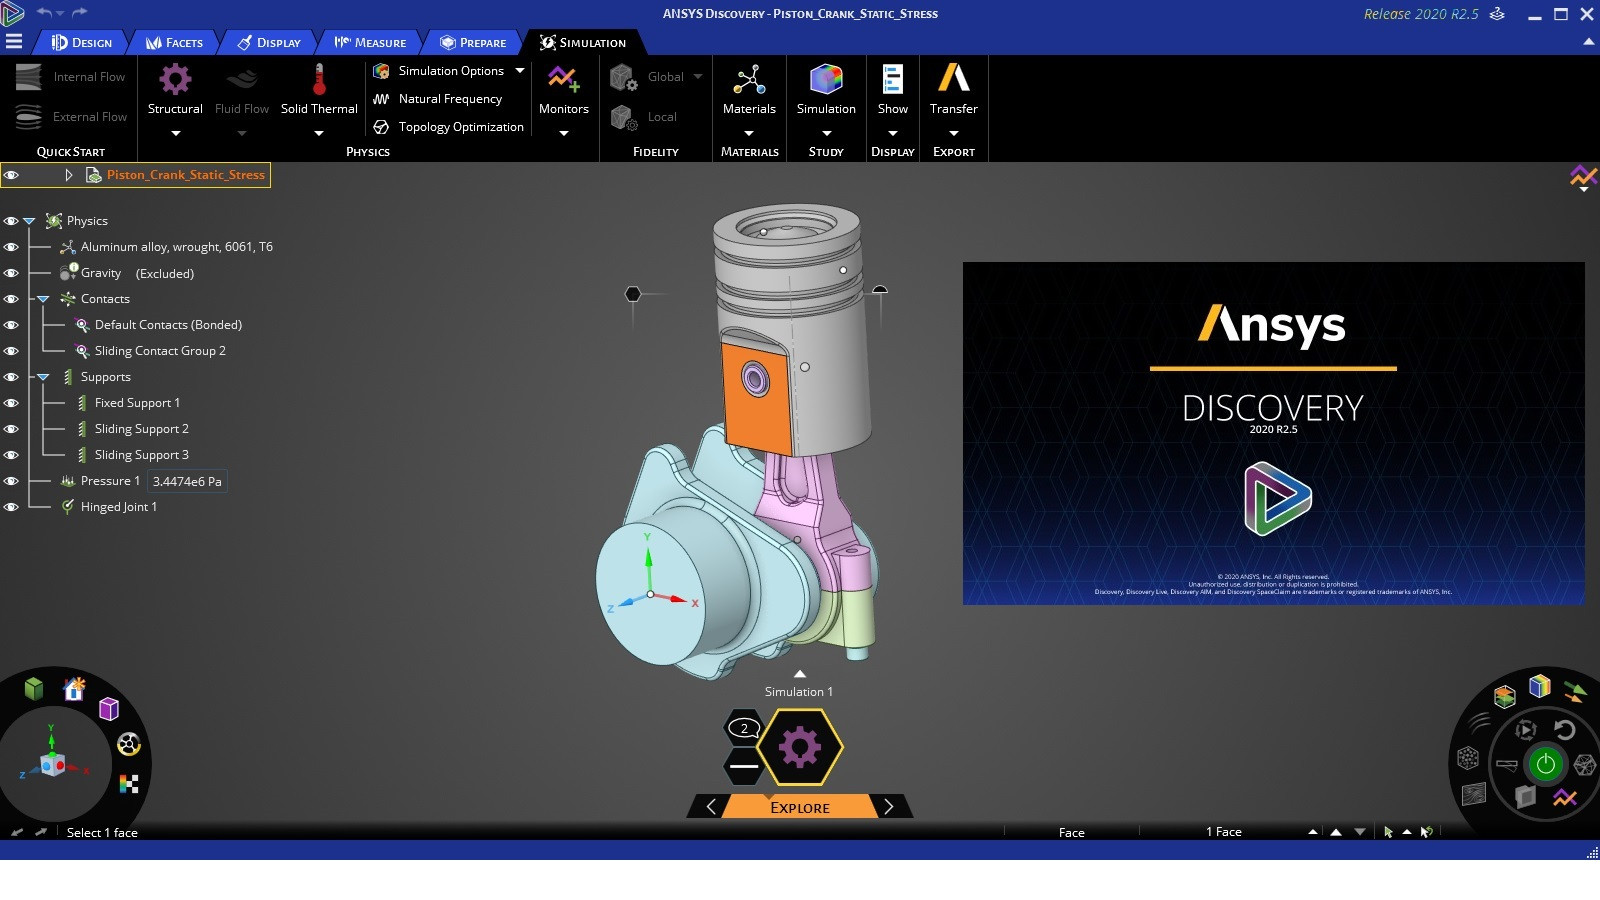 Working with ANSYS Discovery Ultimate 2020 R2.5 full